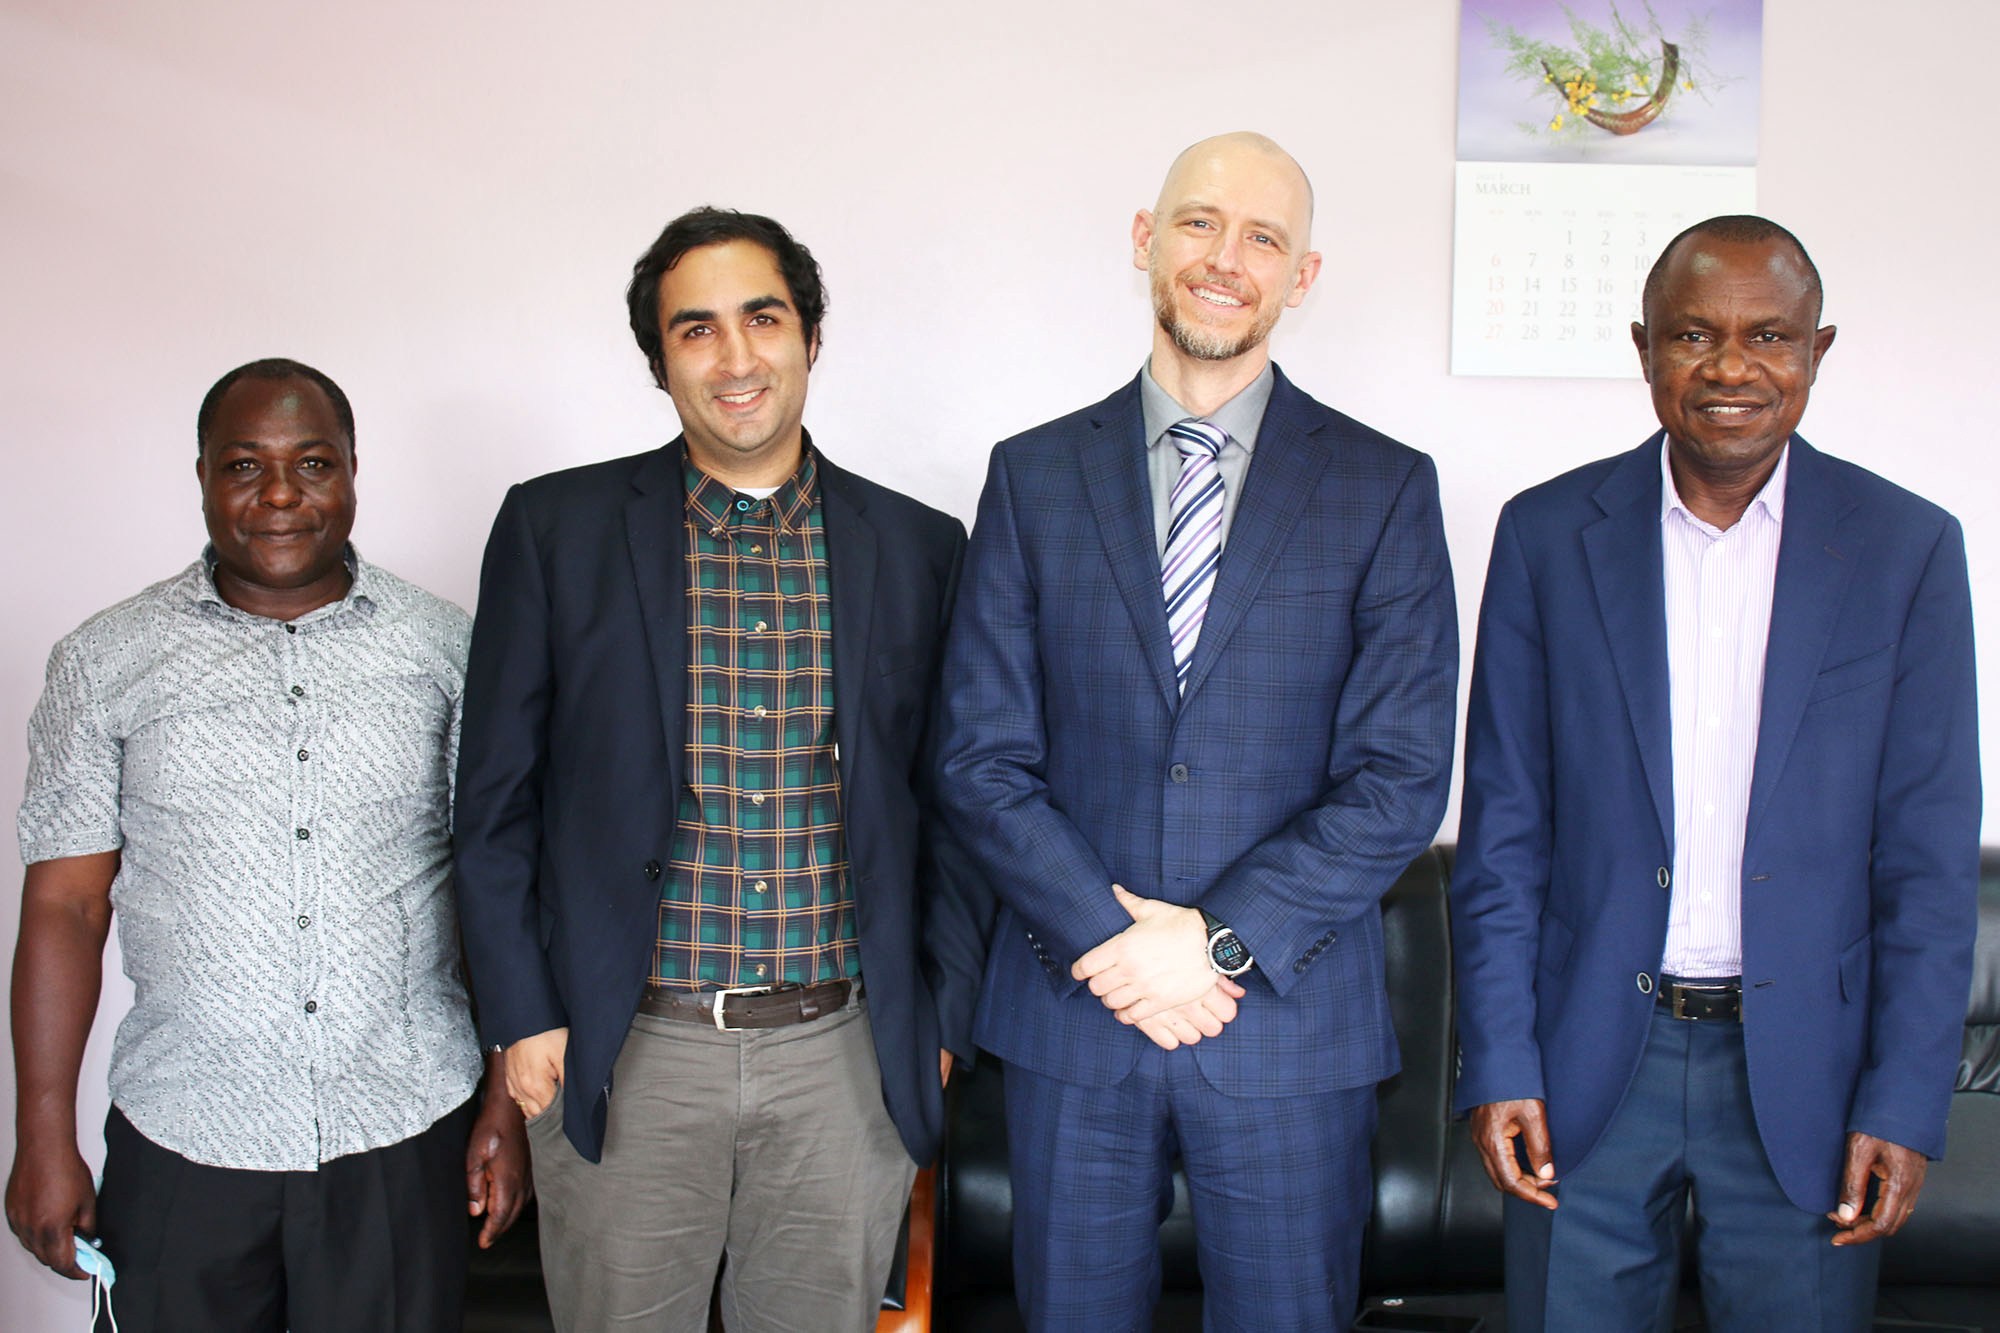 L-R: Dr. Thomas Mwebaze, Chair of the Department of Policy and Development Economics, Dr. Vesall Nourani, Senior Research Associate and Director of the Development Innovation Lab, Dr. Benjamin Krause, Director of the Development Innovation Lab and Assoc. Prof. Eria Hisali, Principal, College of Business and Management Sciences at the meeting on 11th March 2022, Makerere University.